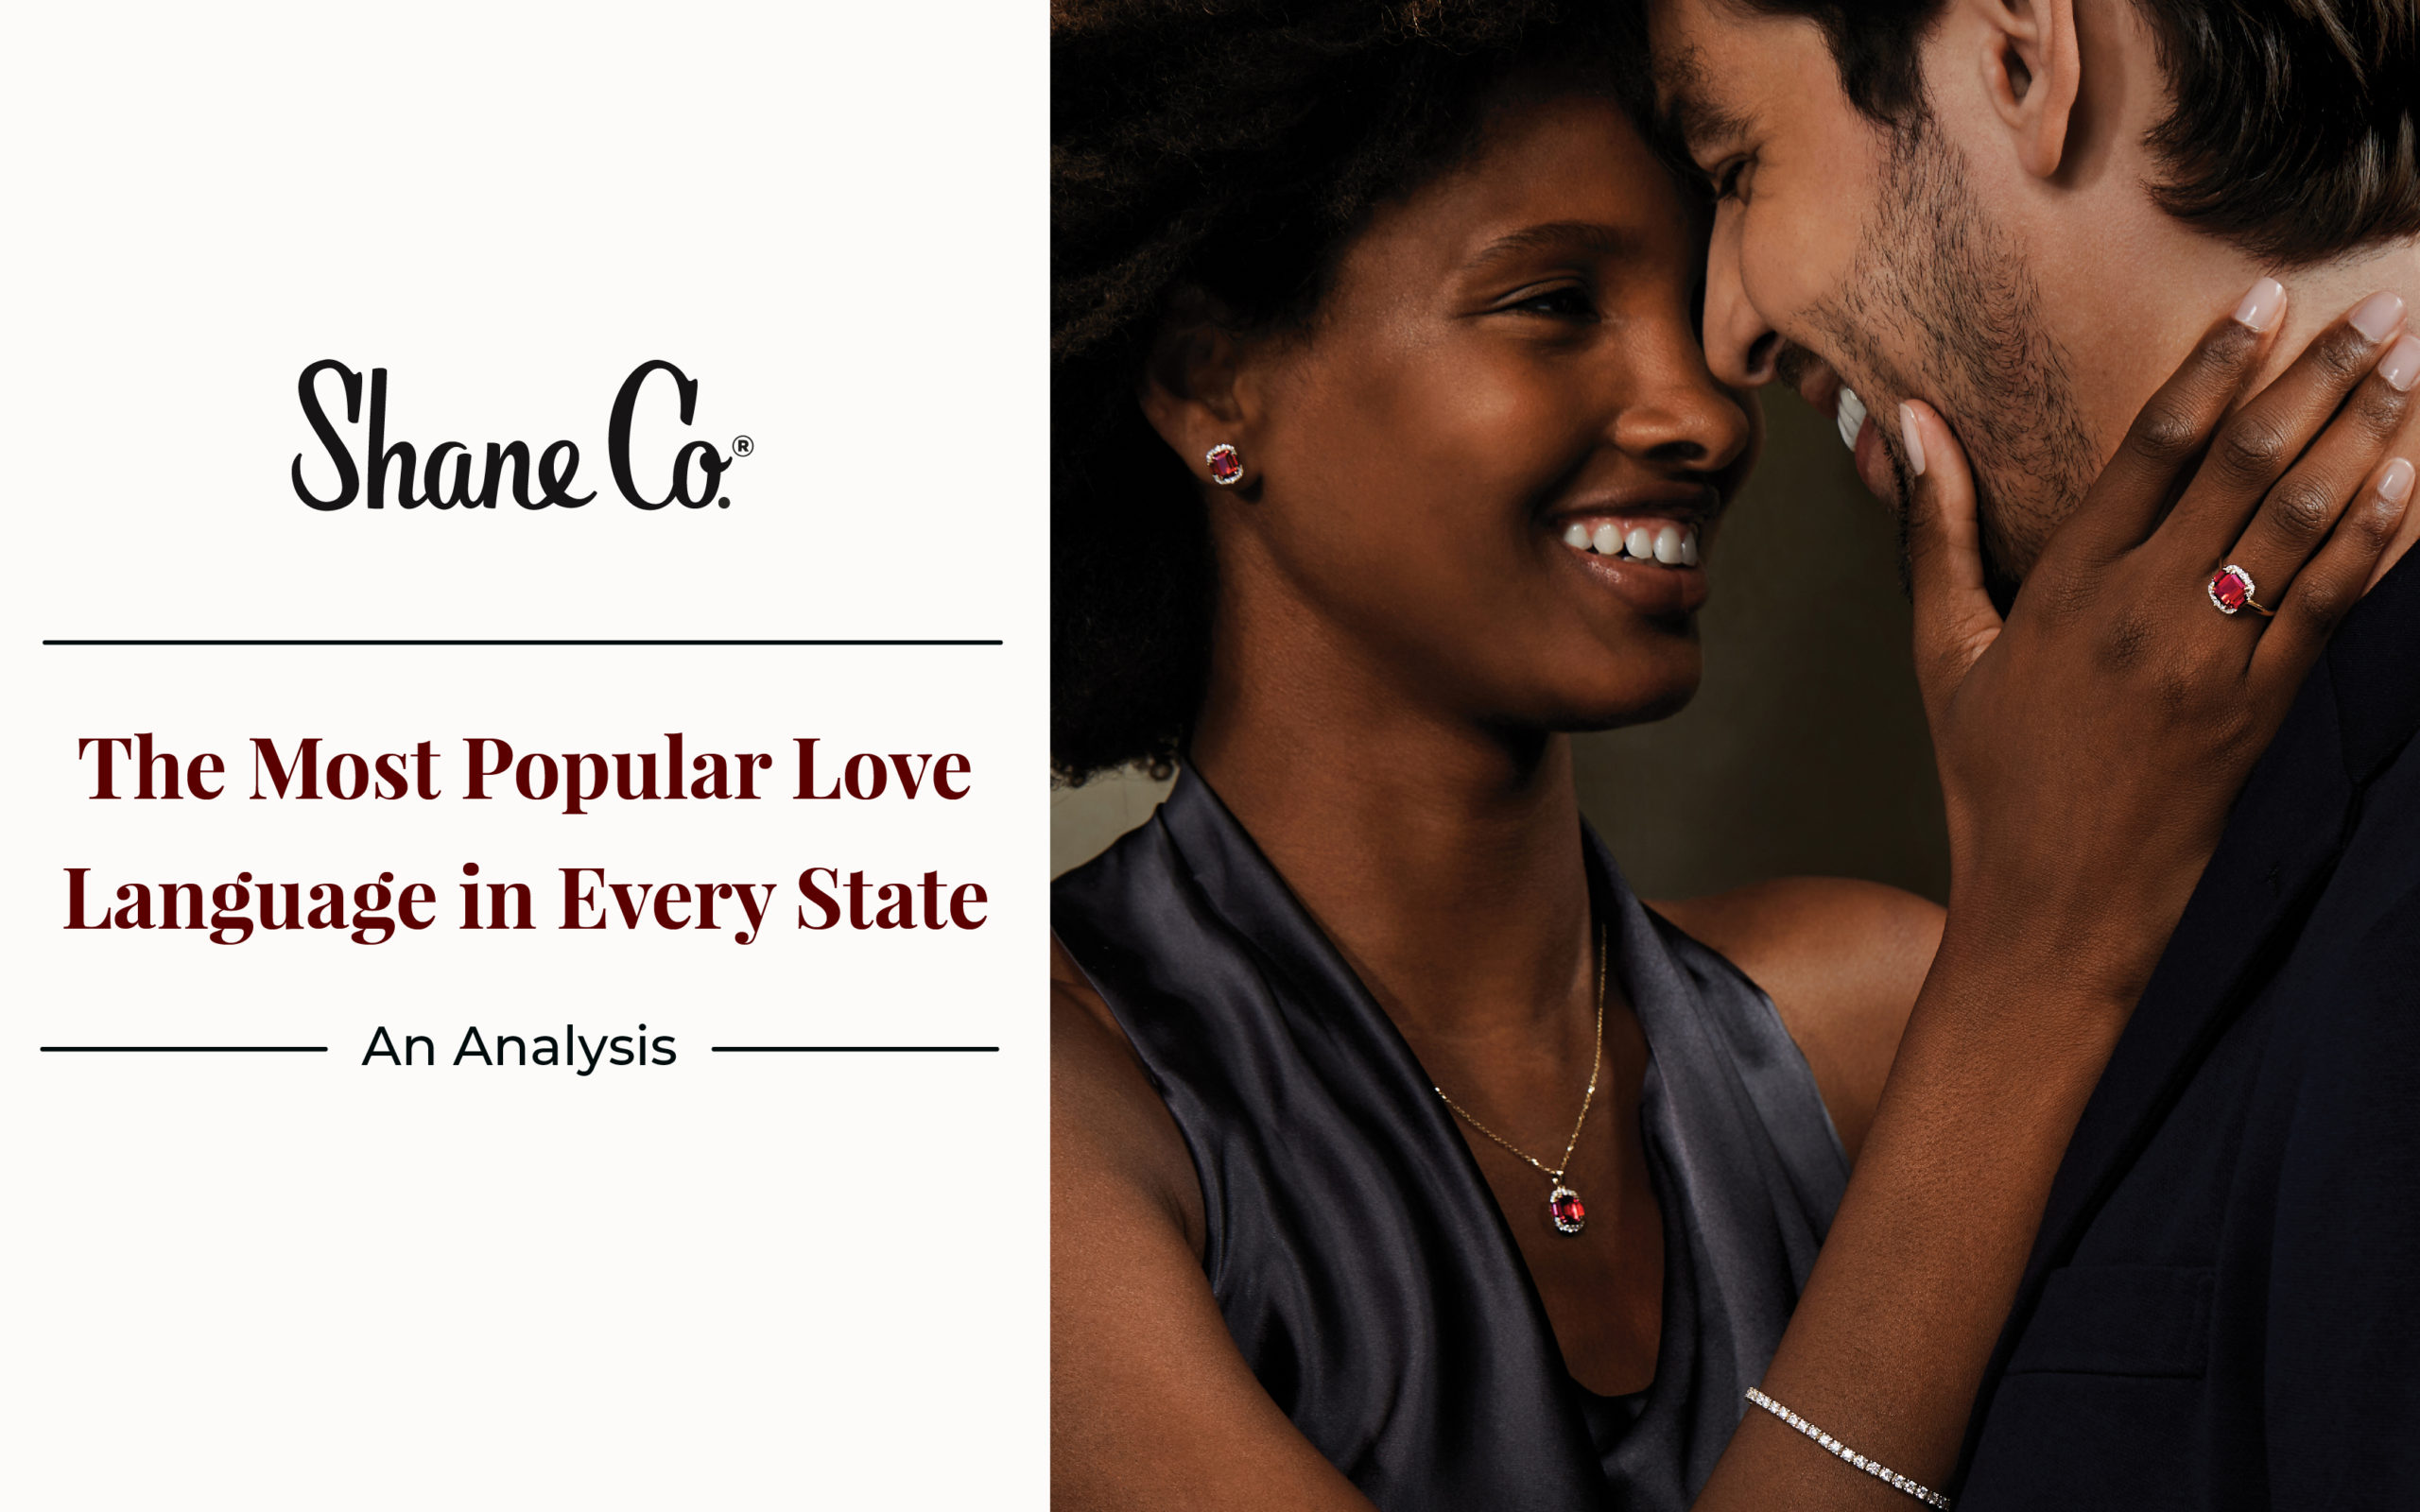 The most popular love language in every state.